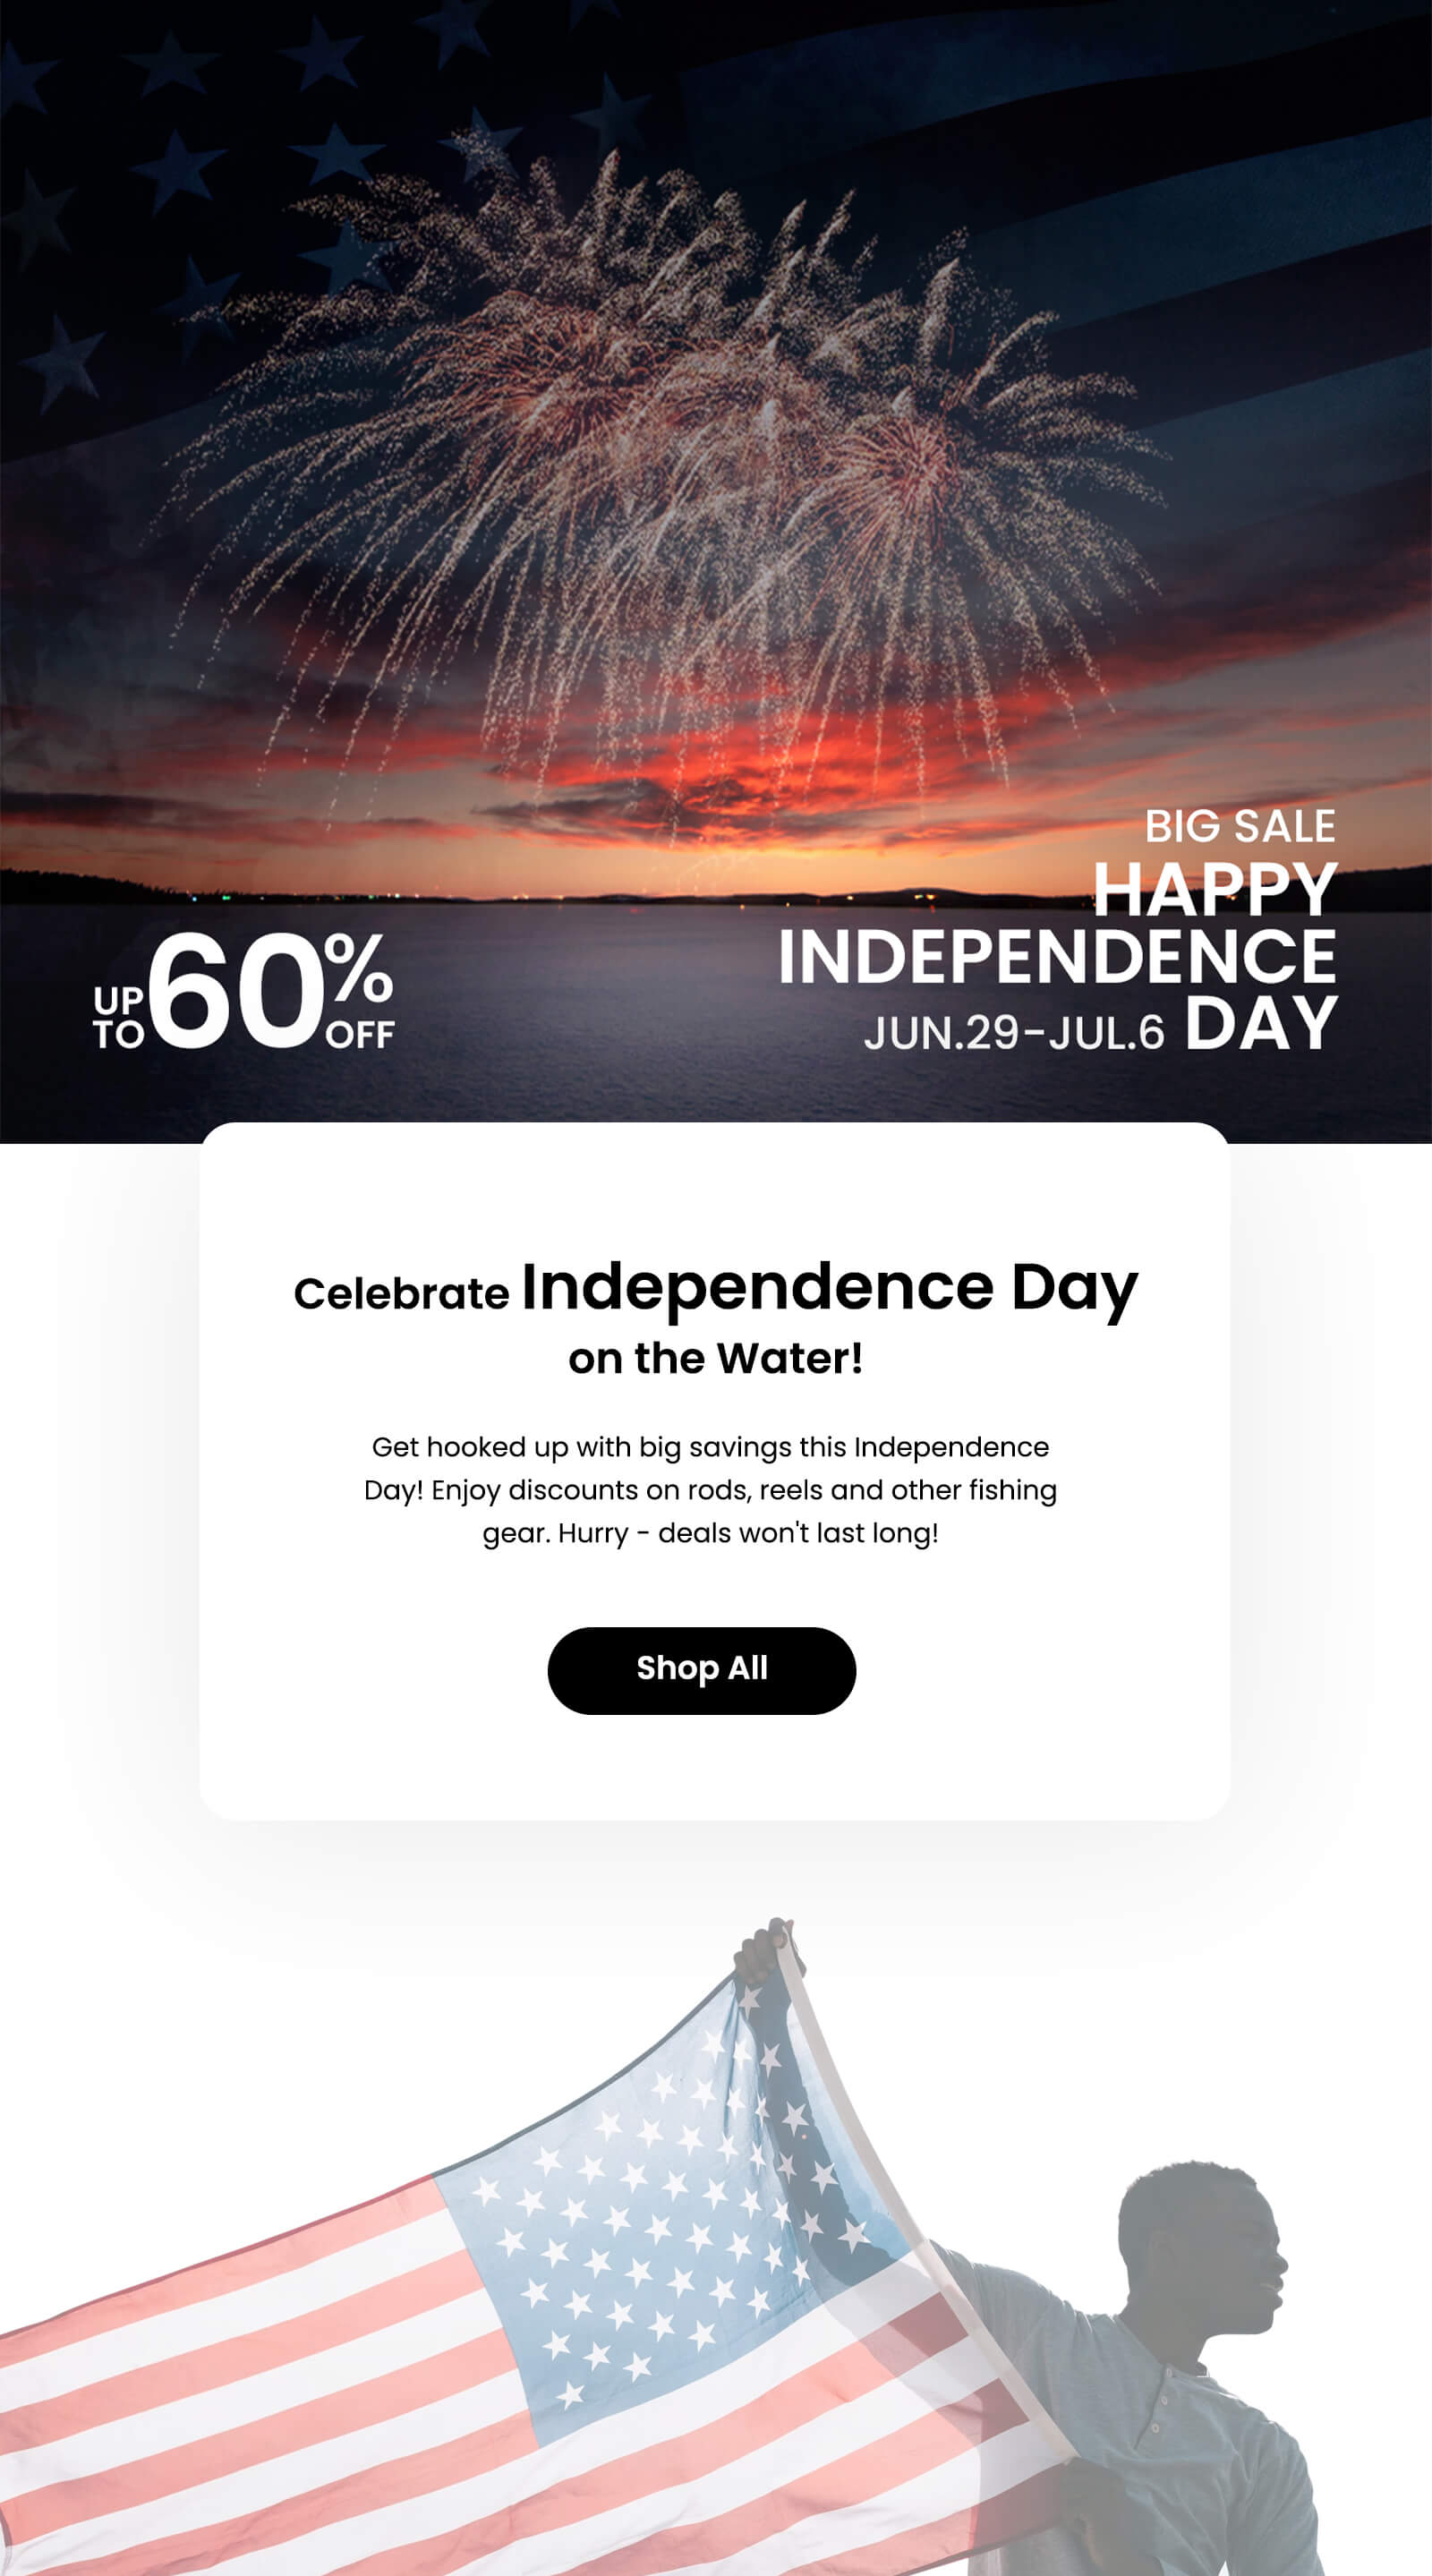 Our Independence Day Sale is in its FINAL DAYS! - KastKing